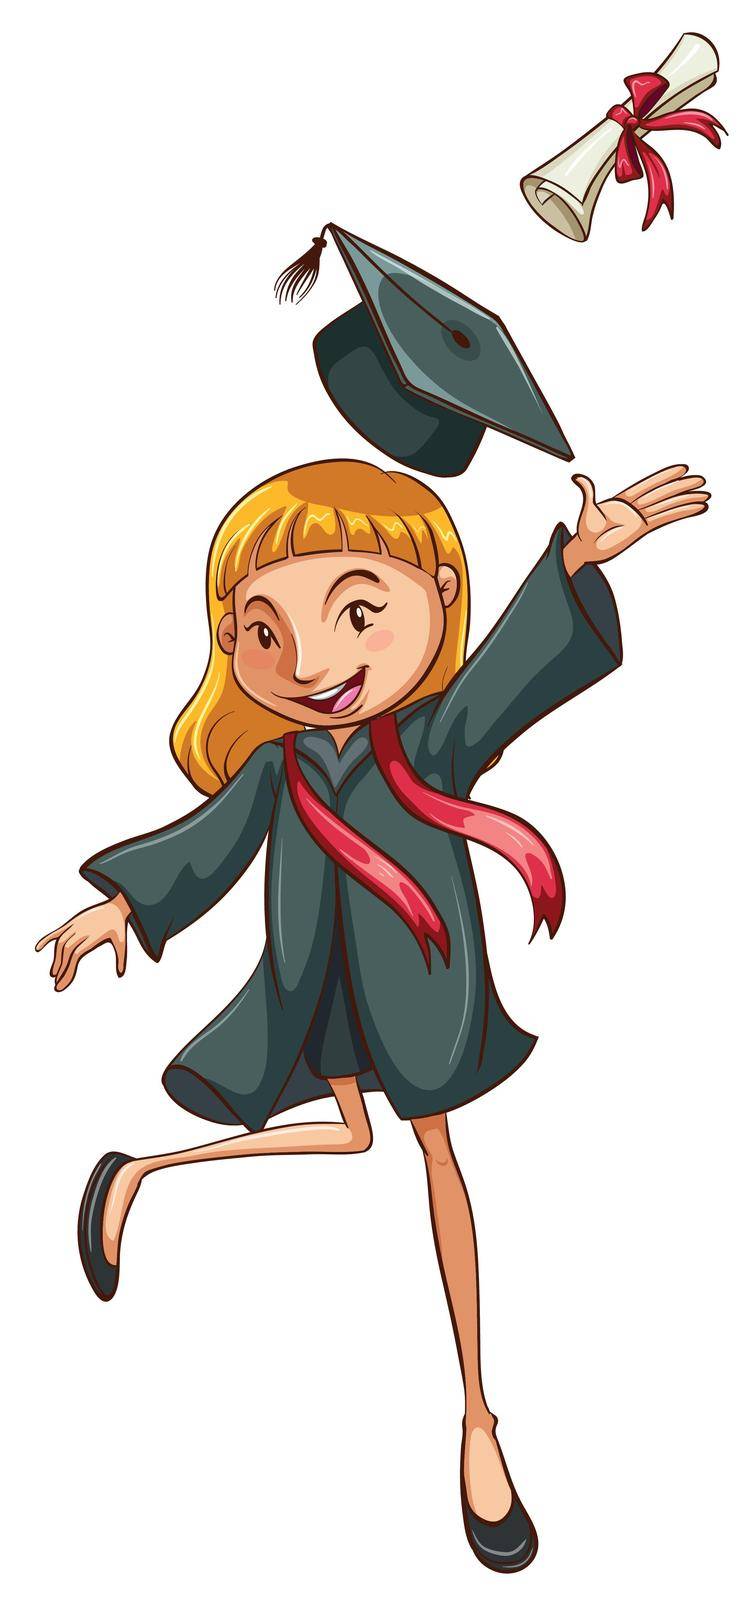 Illustration of a girl graduating with a degree